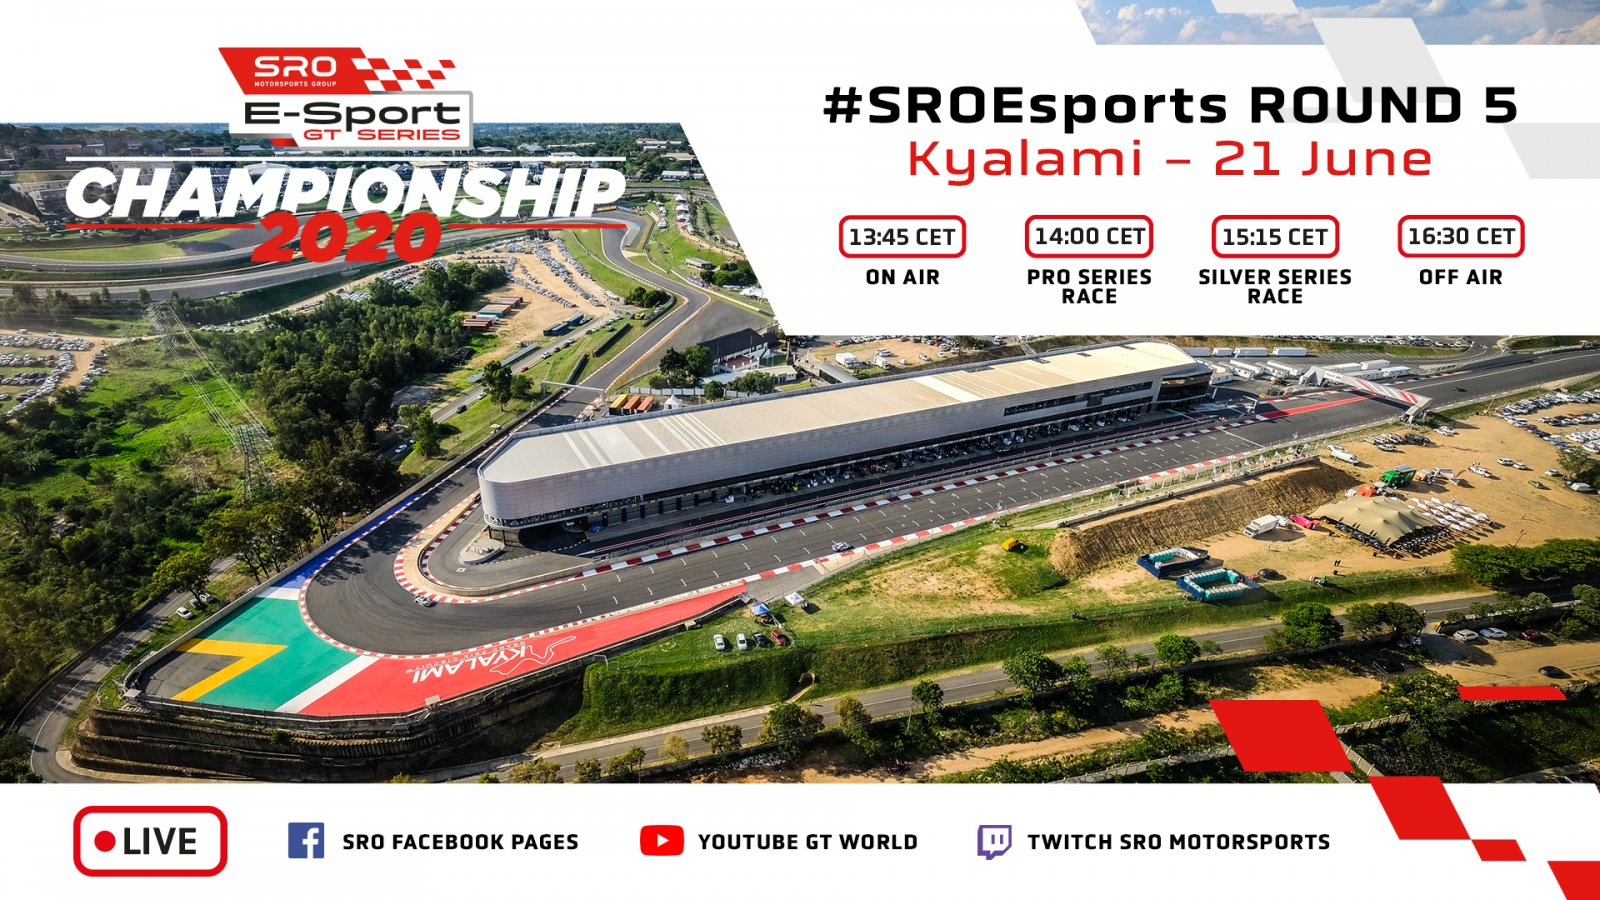 Action-packed weekend in store as SRO E-Sport GT Series prepares for title showdown 